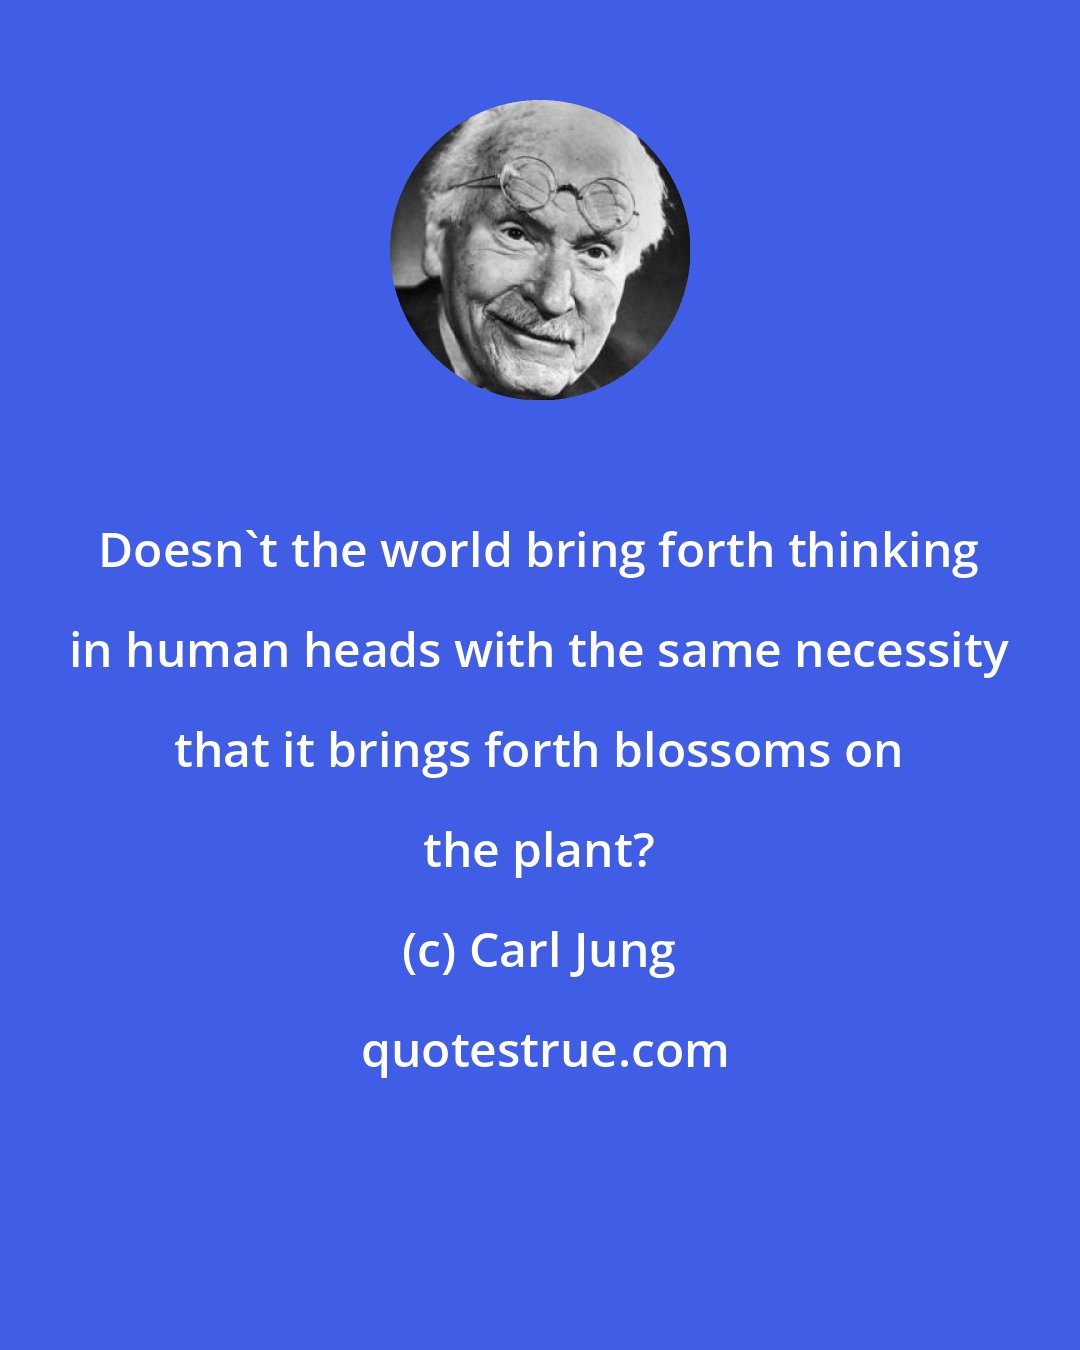 Carl Jung: Doesn't the world bring forth thinking in human heads with the same necessity that it brings forth blossoms on the plant?